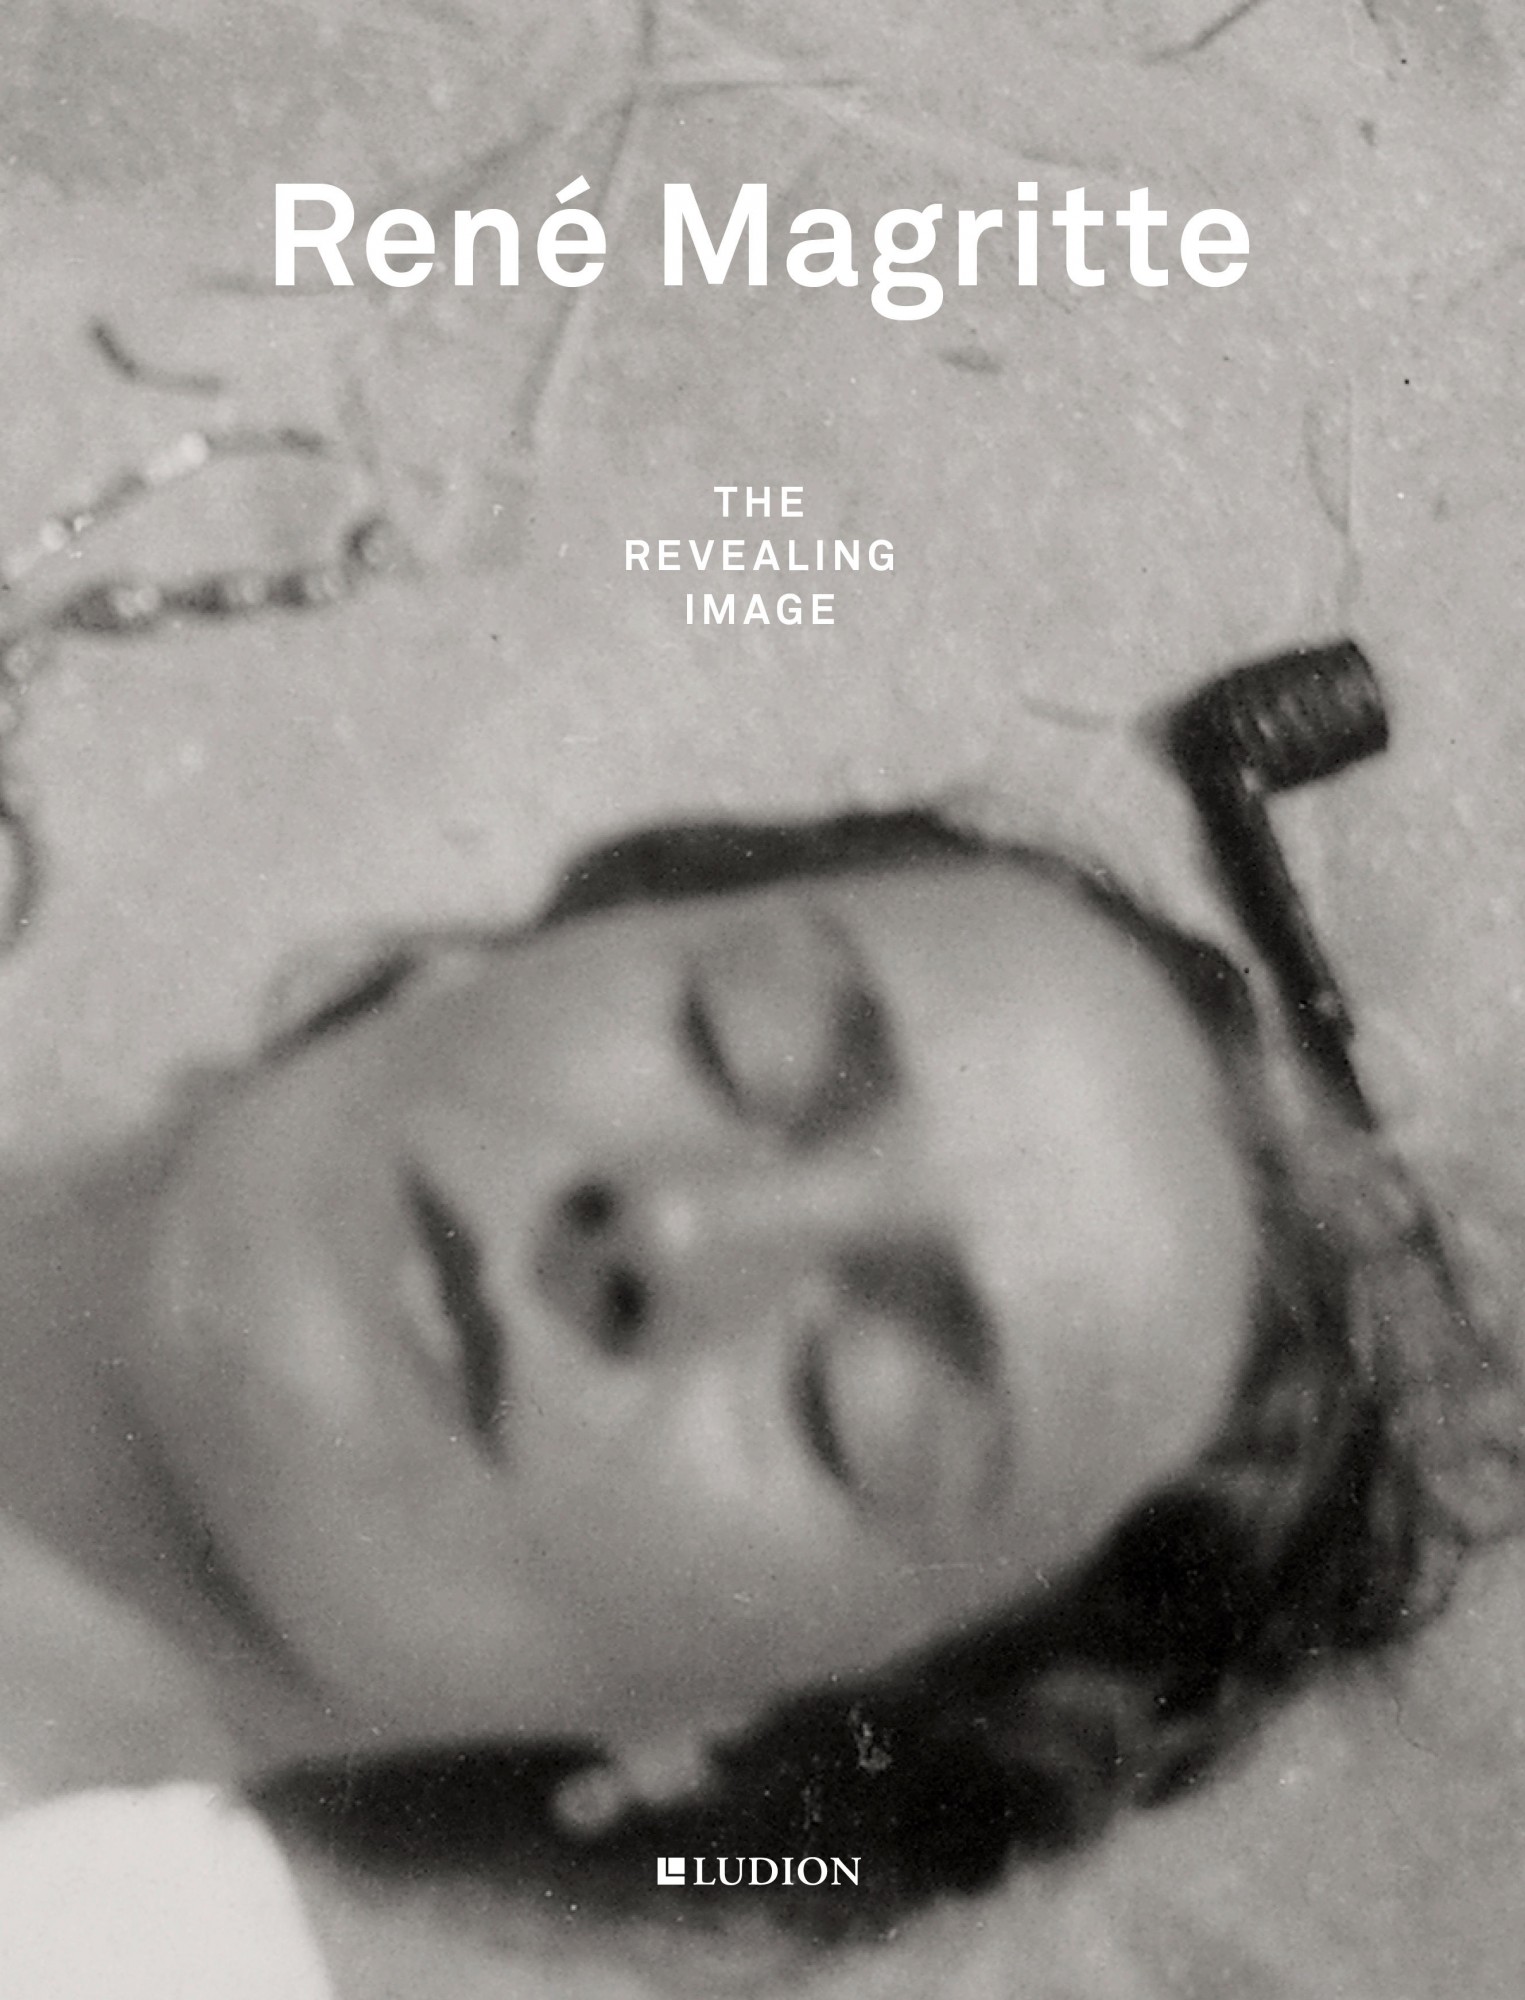 René Magritte – The Revealing Image